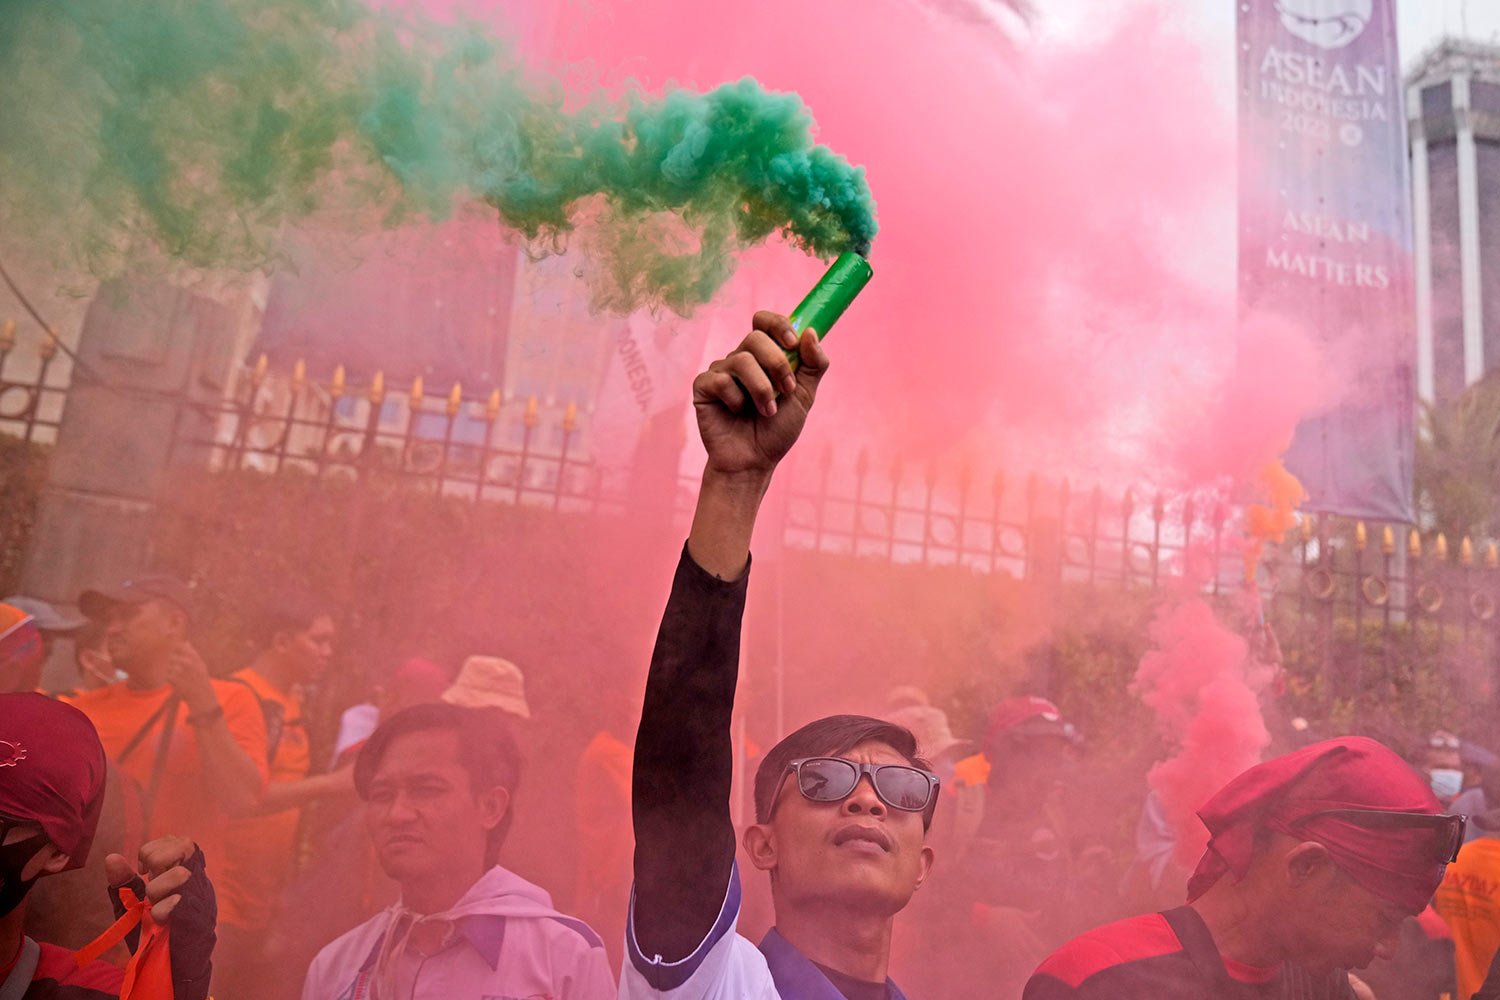  A worker holds up a smoke stick during a May Day rally in Jakarta, Indonesia, Monday, May 1, 2023. (AP Photo/Dita Alangkara) 